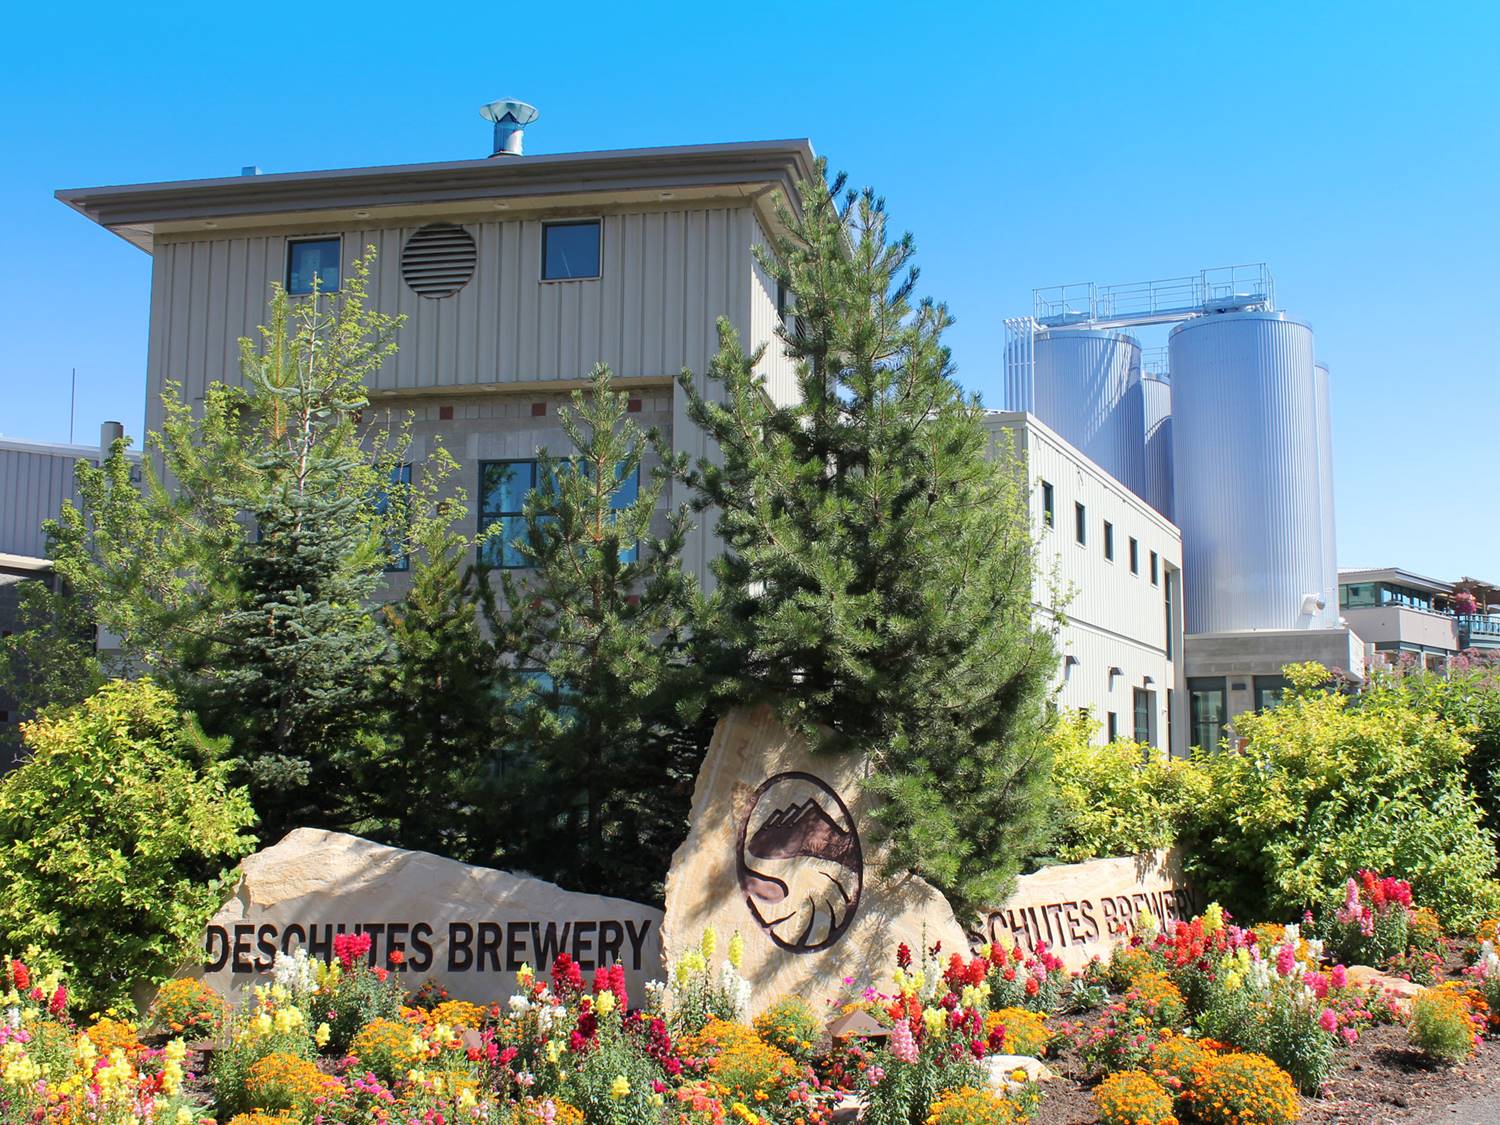 Image Credit: Deschutes Brewery-Production Facility by U.S. Department of Agriculture via Flickr (CC BY 2.0)